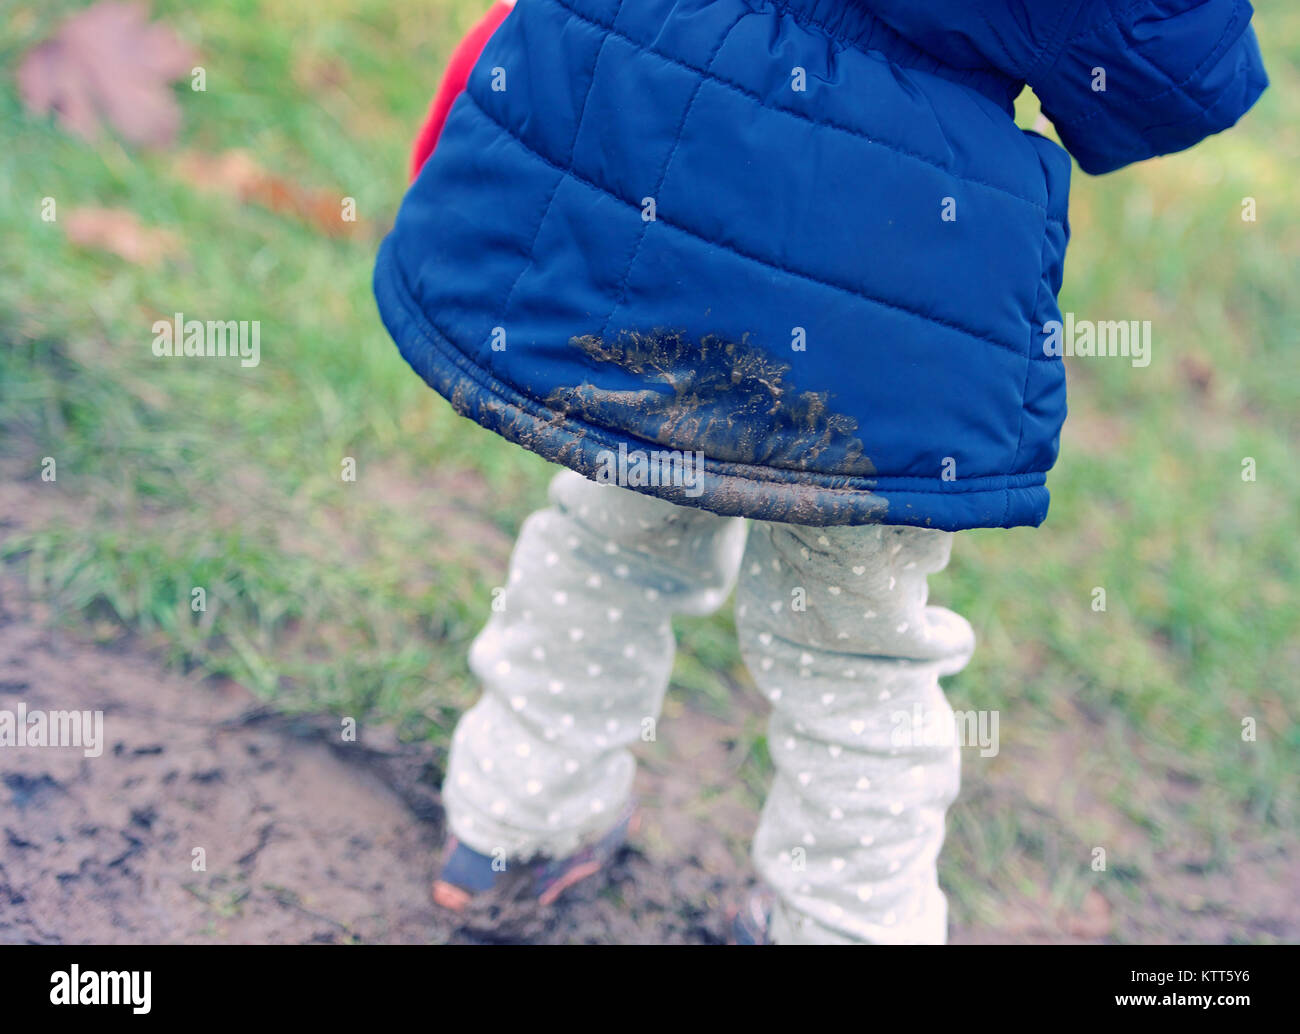 Close-up of a girl with mud on her coat Stock Photo